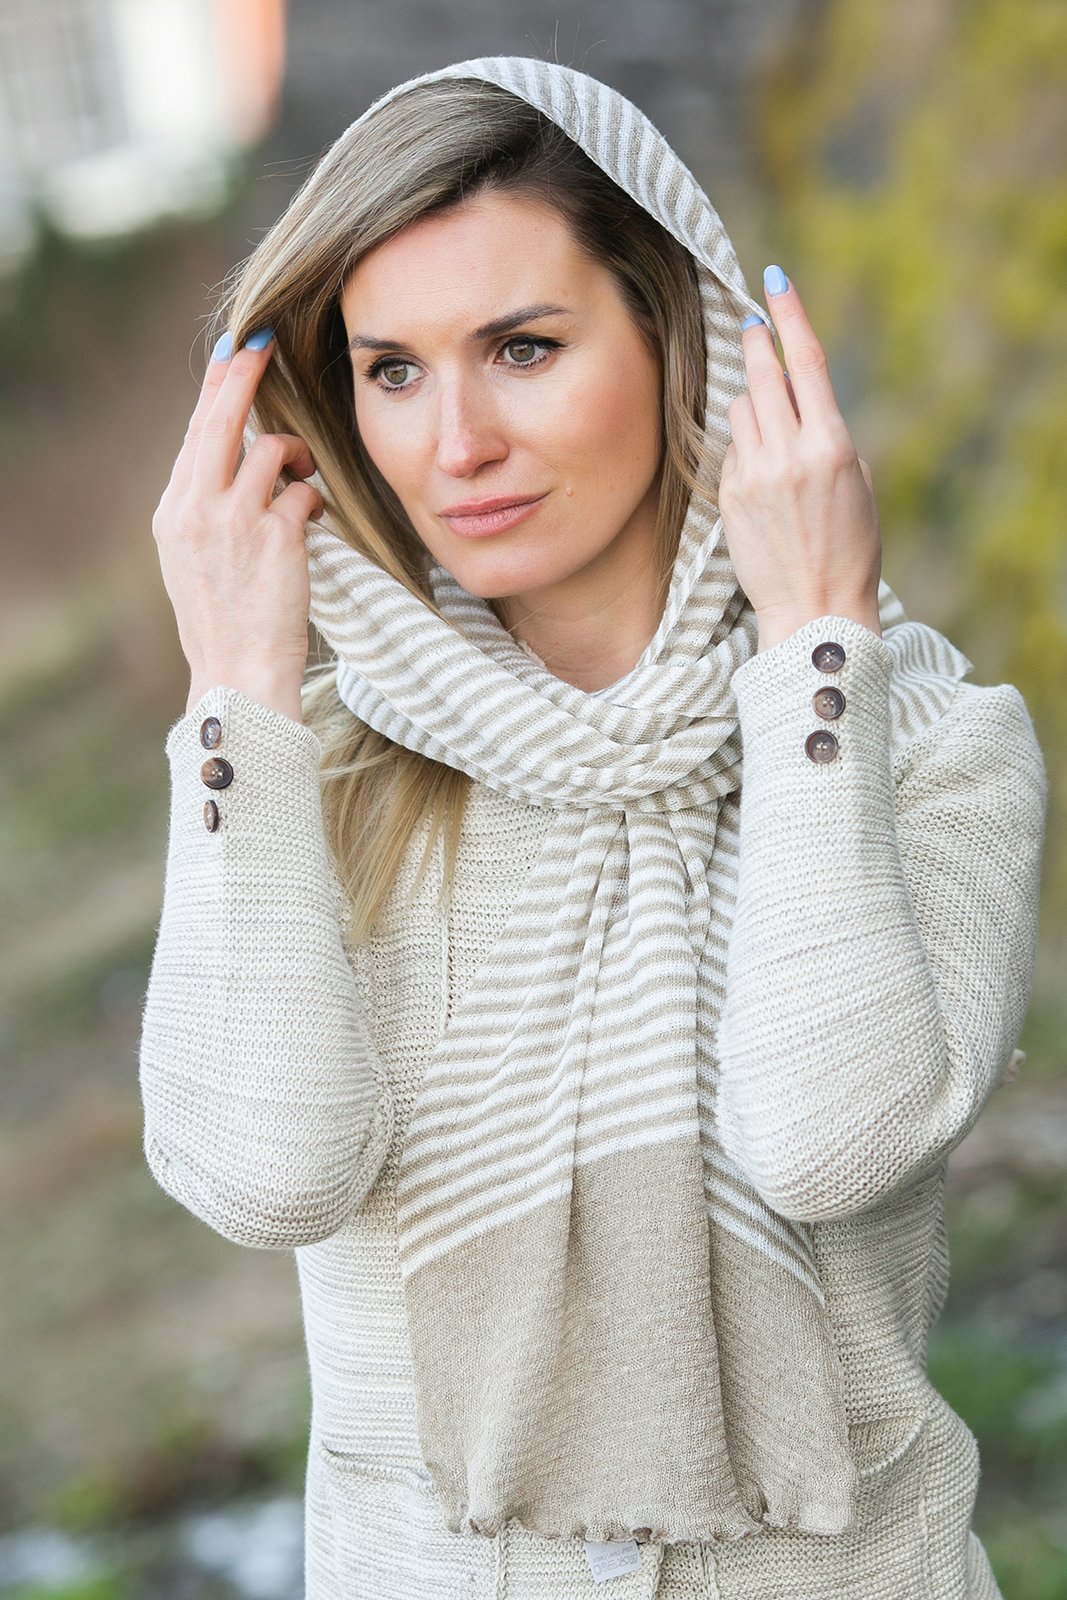 Elegant woman wearing a stylish linen beige striped scarf and textured sweater, ideal for fall fashion. The scarf is loosely wrapped around her neck, extending over her head, accentuating her blonde hair and contemplative expression. Her look is completed with a light beige and white striped pattern, perfect for a chic autumn outfit. The soft, blurred background features green foliage, adding a natural touch to the scene